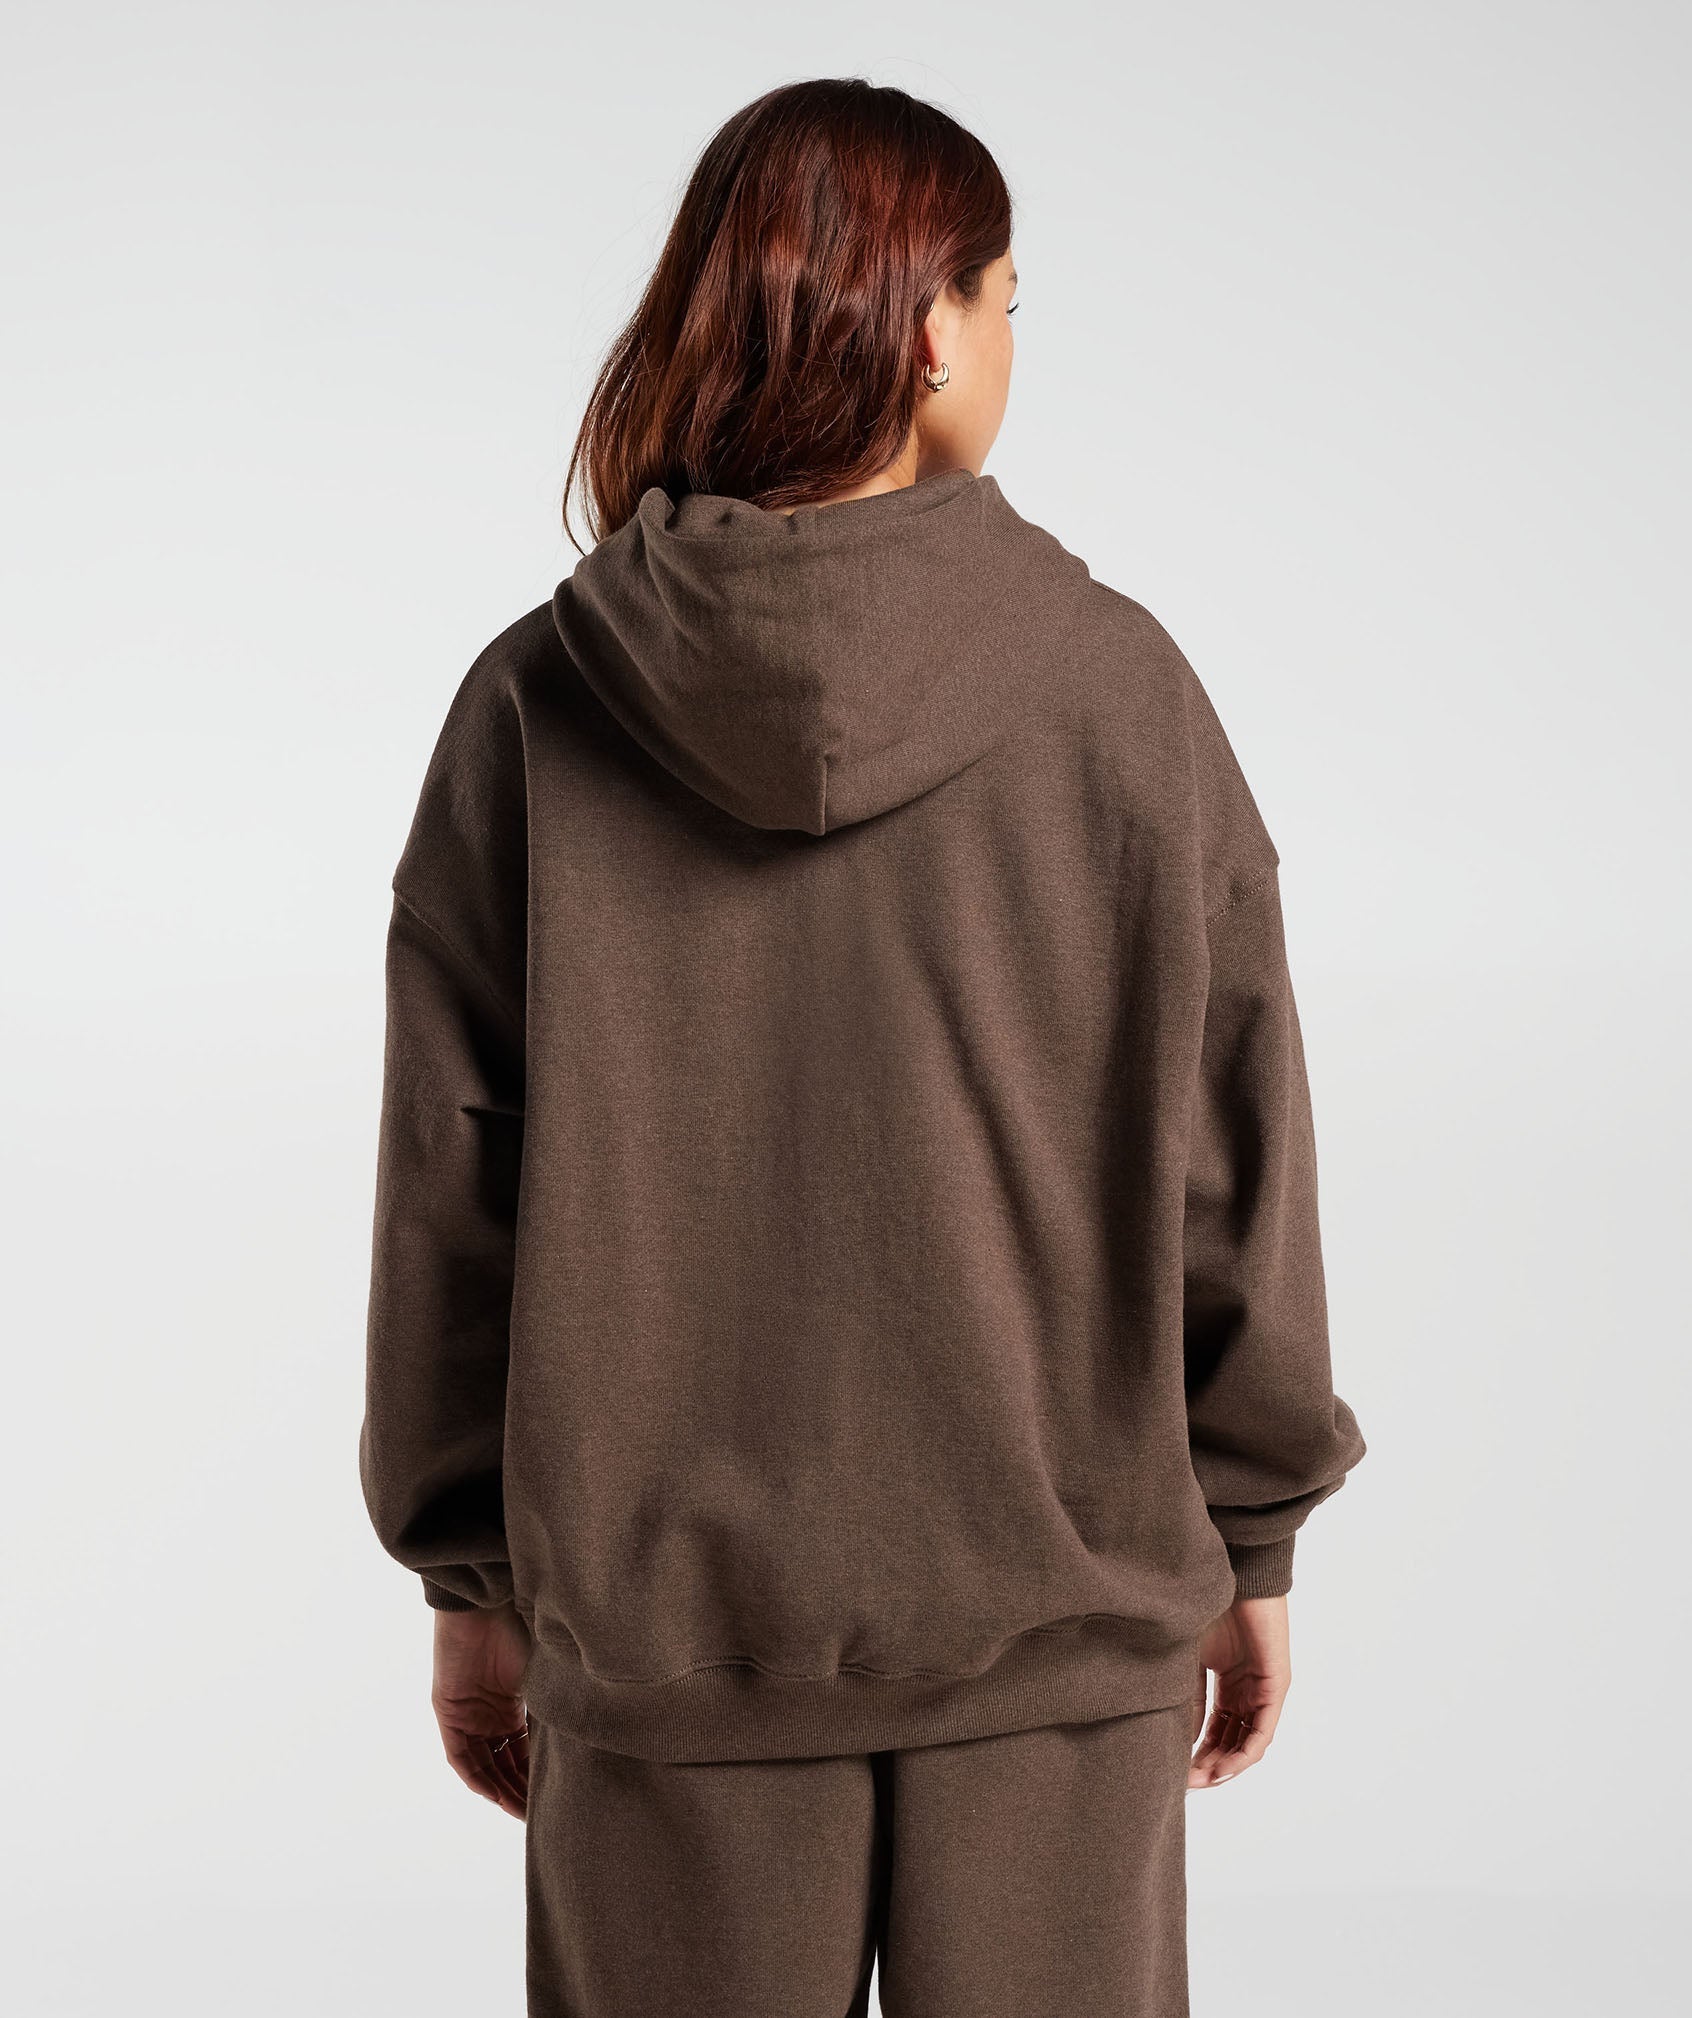 Rest Day Sweats Hoodie in Cozy Brown Marl - view 3